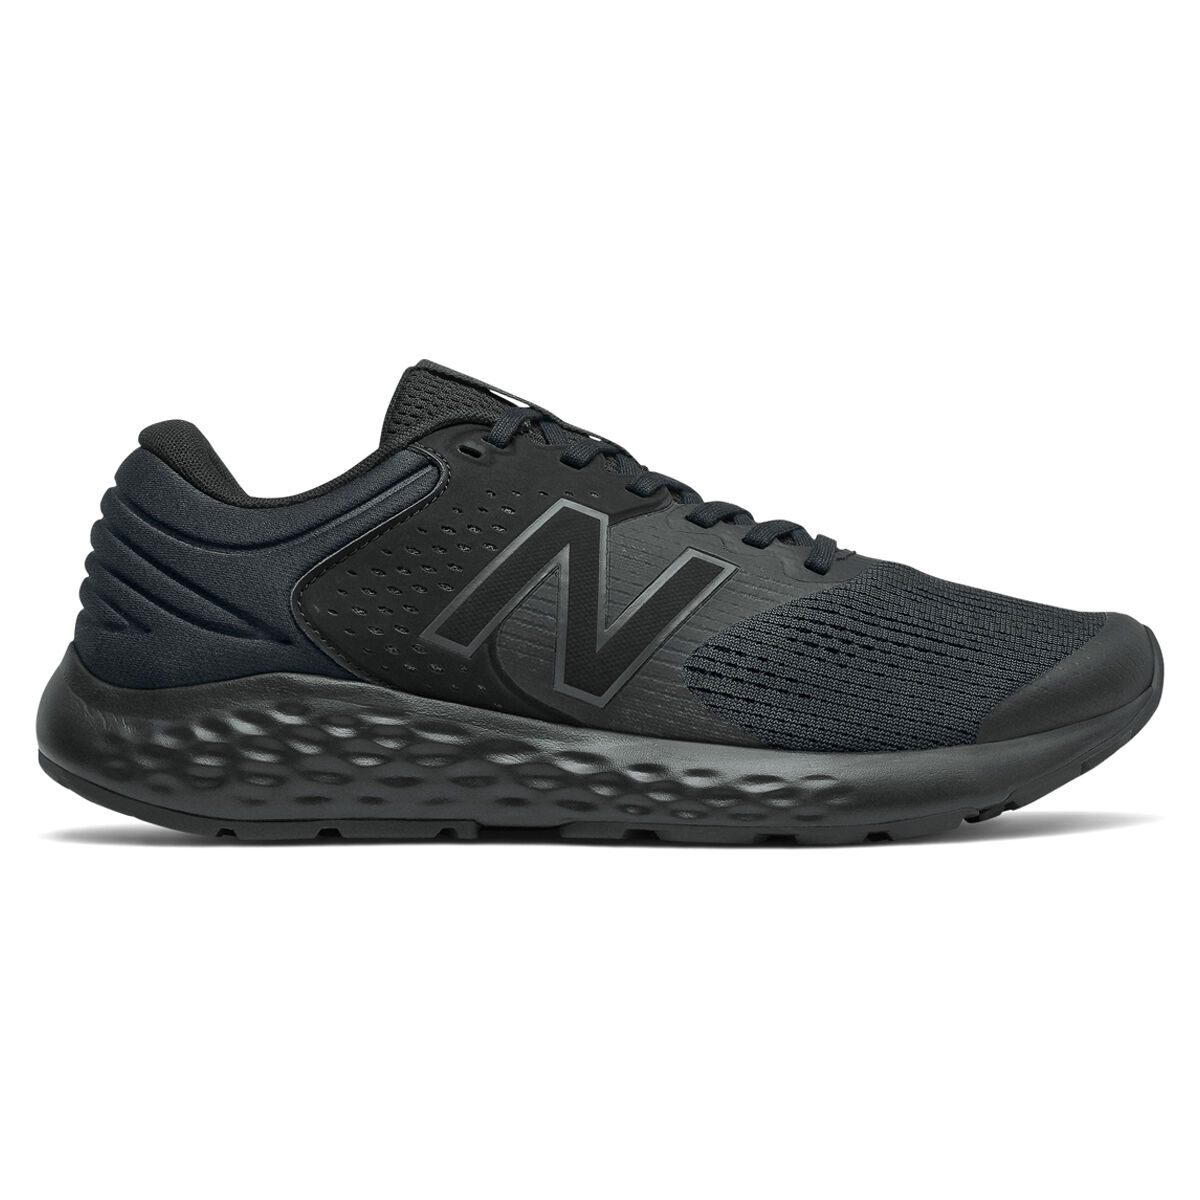 nb stability shoes